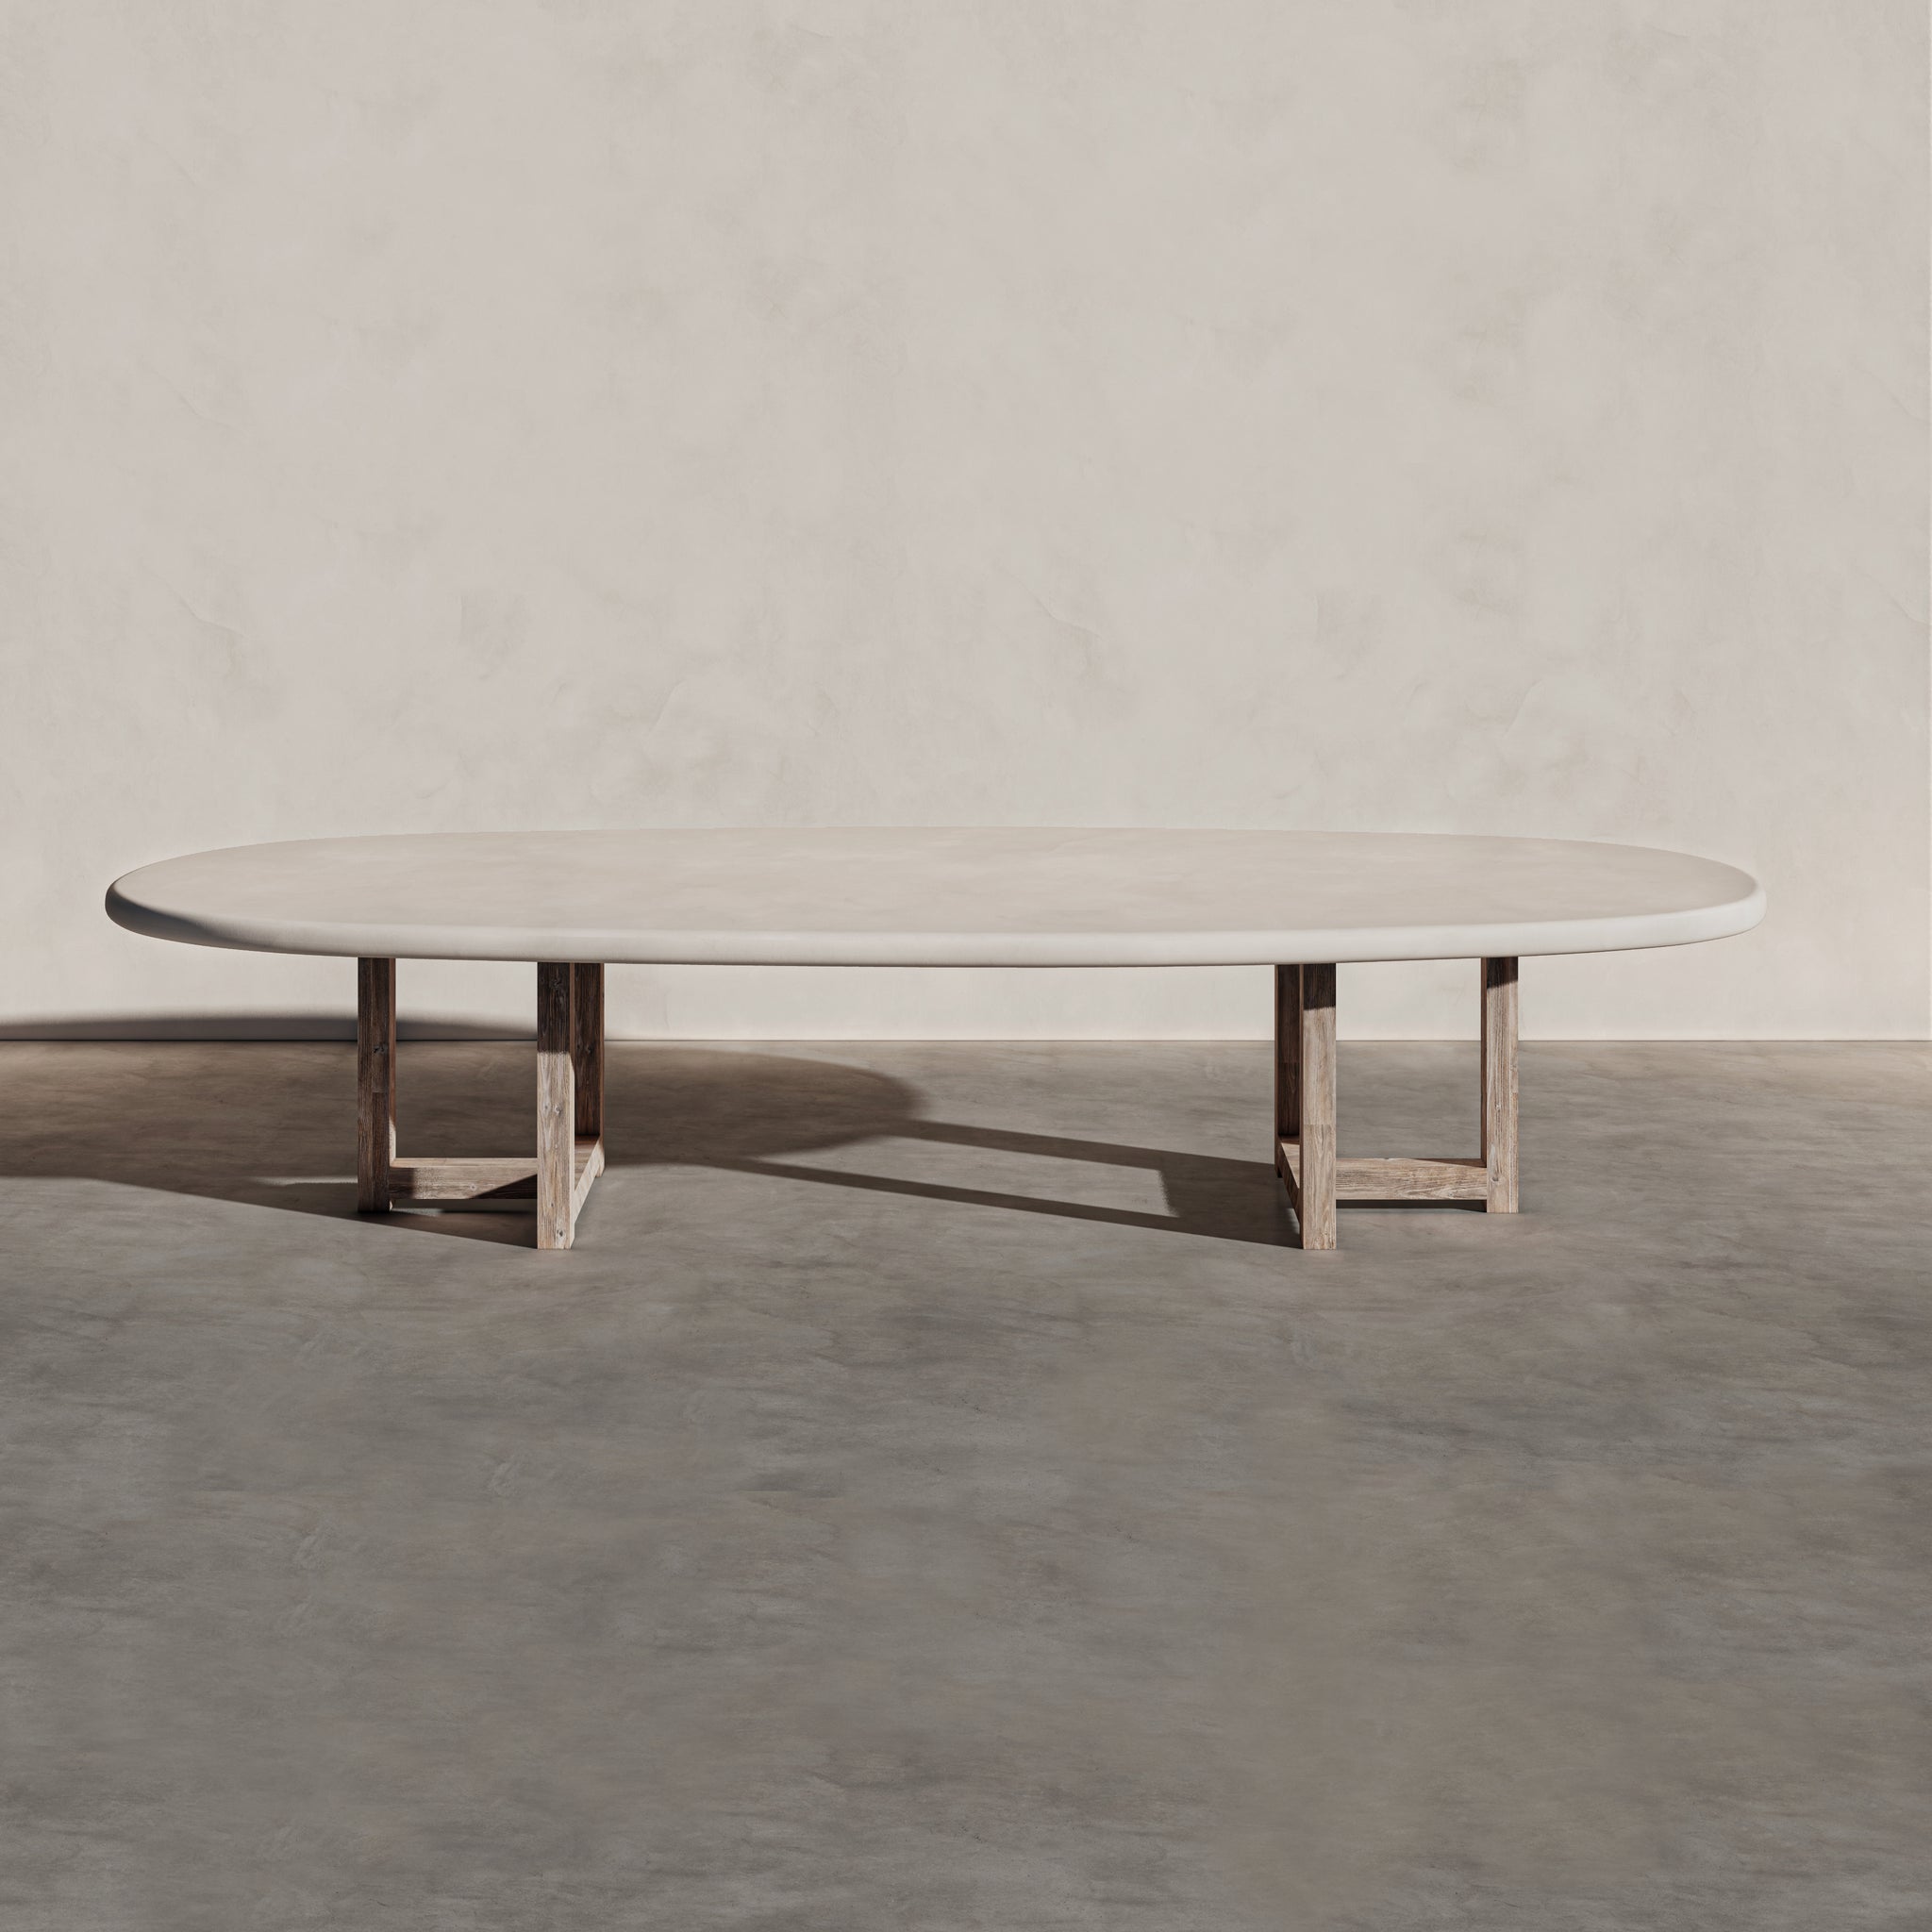 OS - Oval Long Dining Table with Wooden Legs